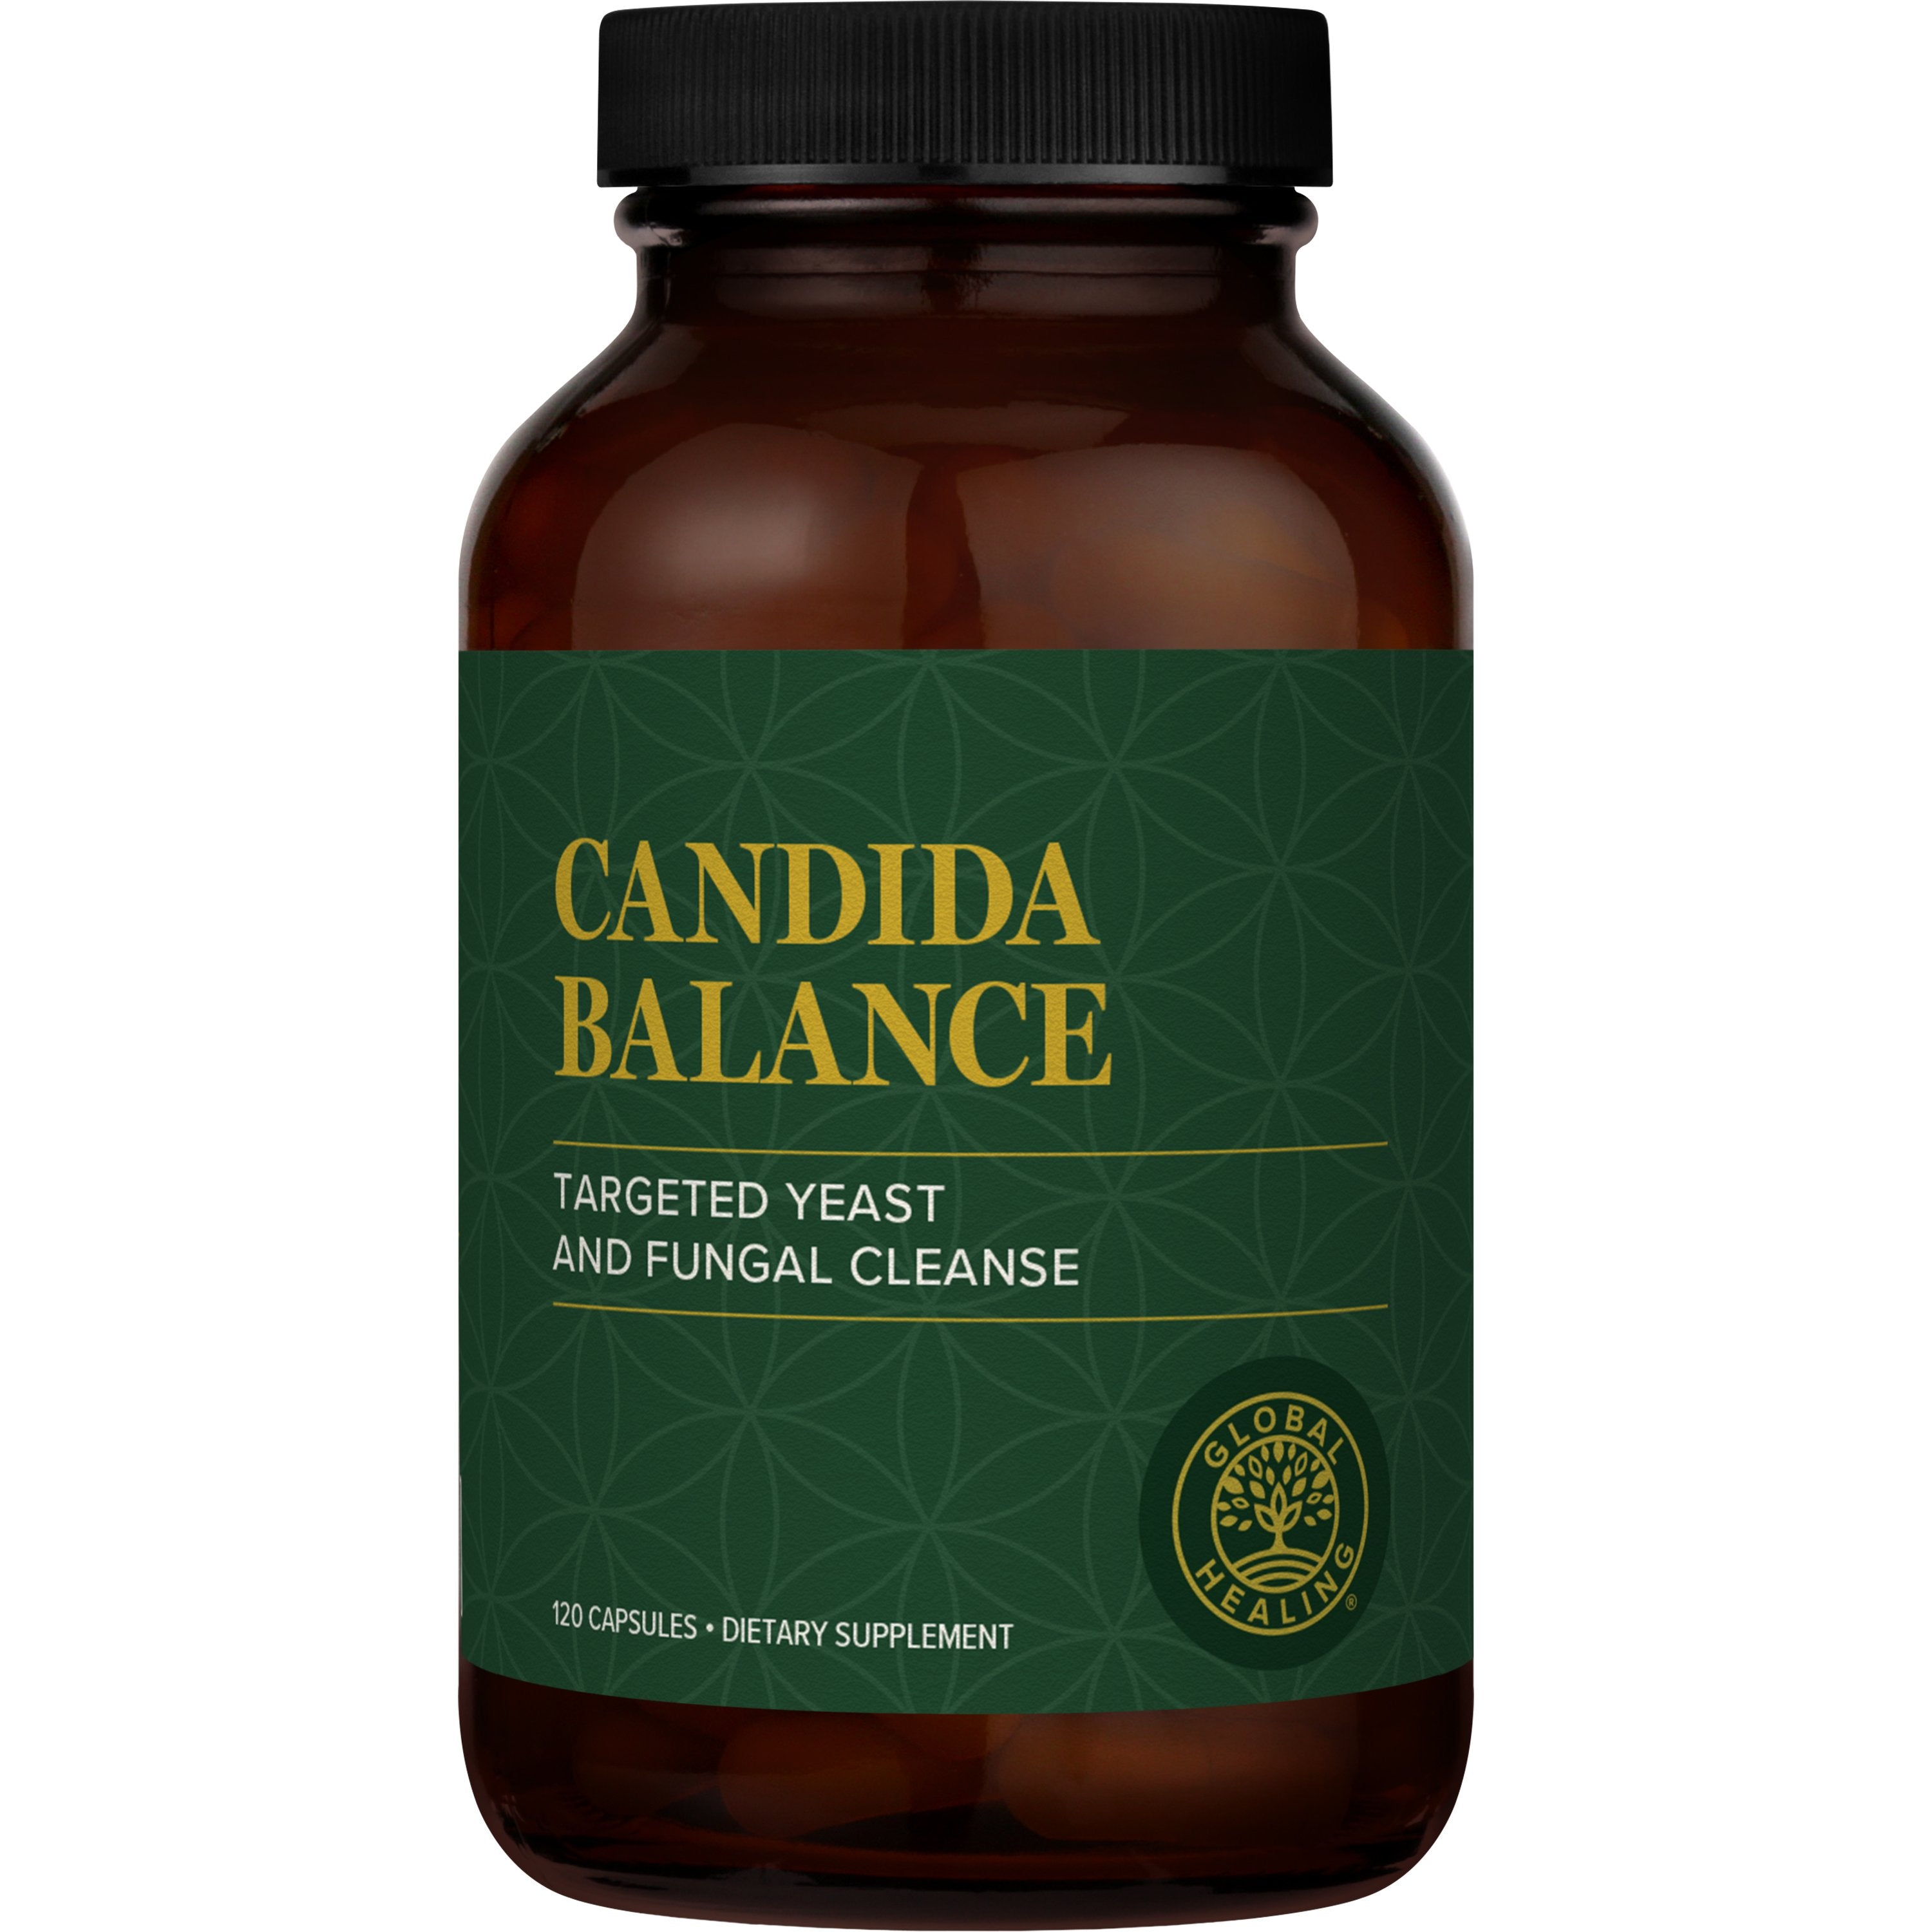 Global Healing presents Candida Balance (formerly Mycozil), a powerful supplement consisting of 120 capsules.